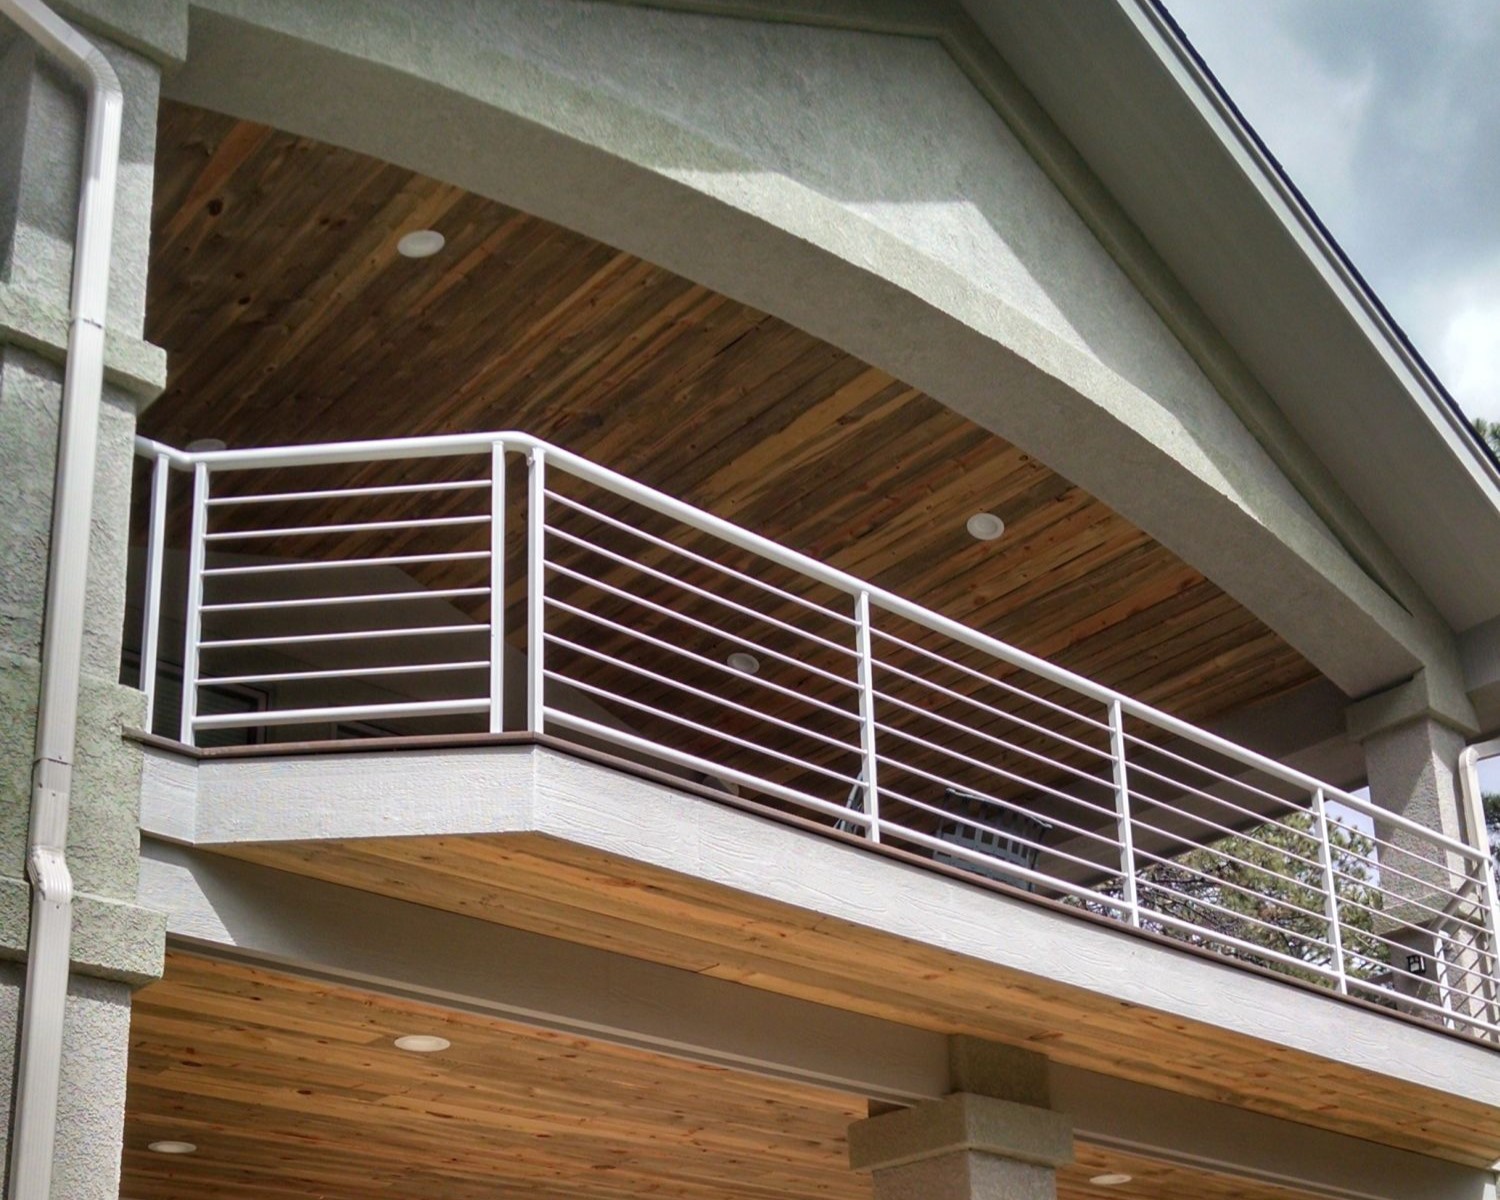 Custom deck with gabled deck cover that features a white metal railing with horizontal balusters.